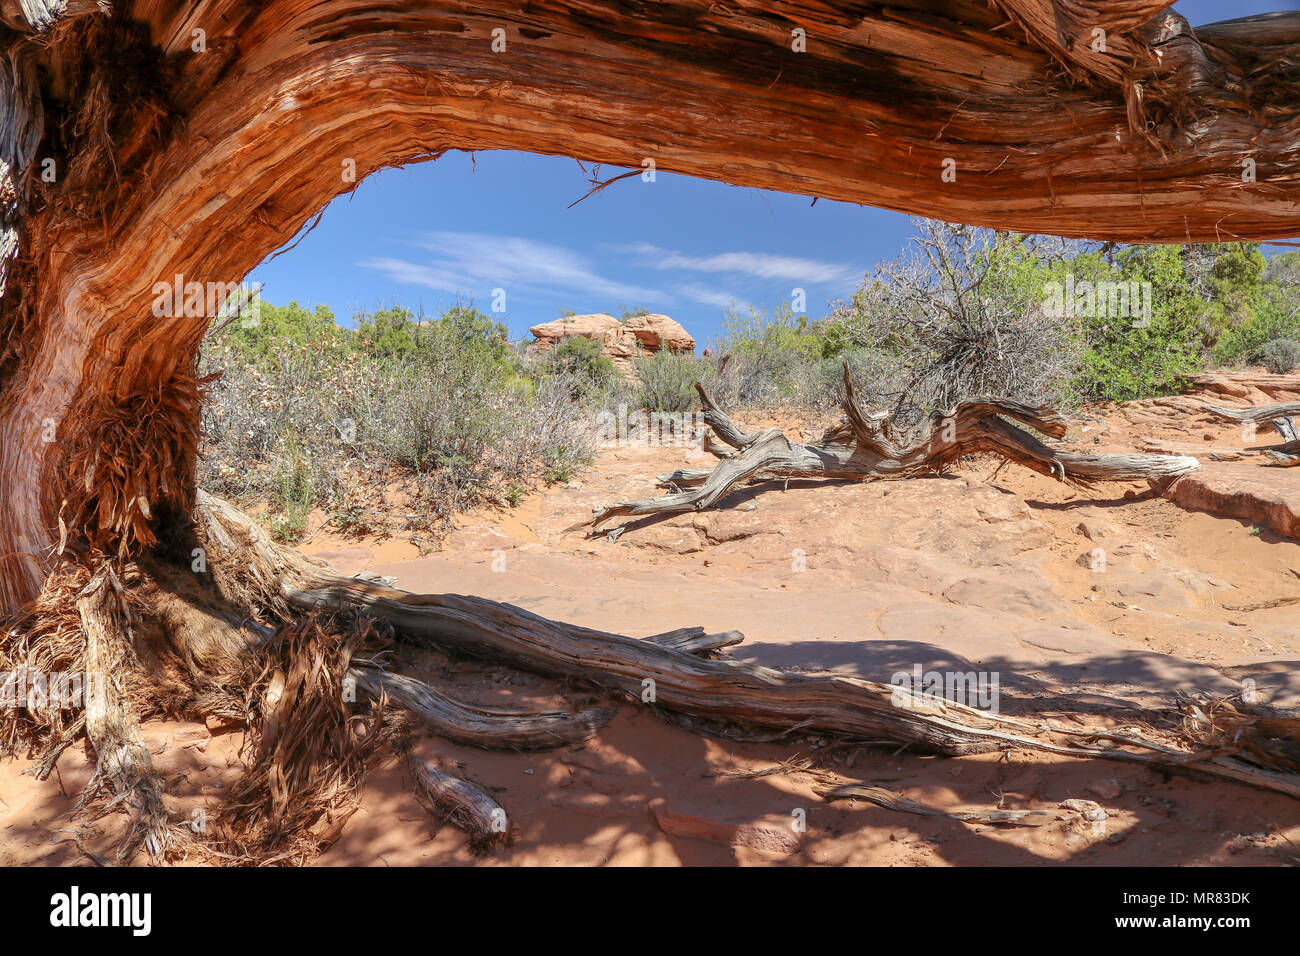 Hiking at the Arches National Park Moab Utah, found a shady place to rest under a dead bent tree Stock Photo